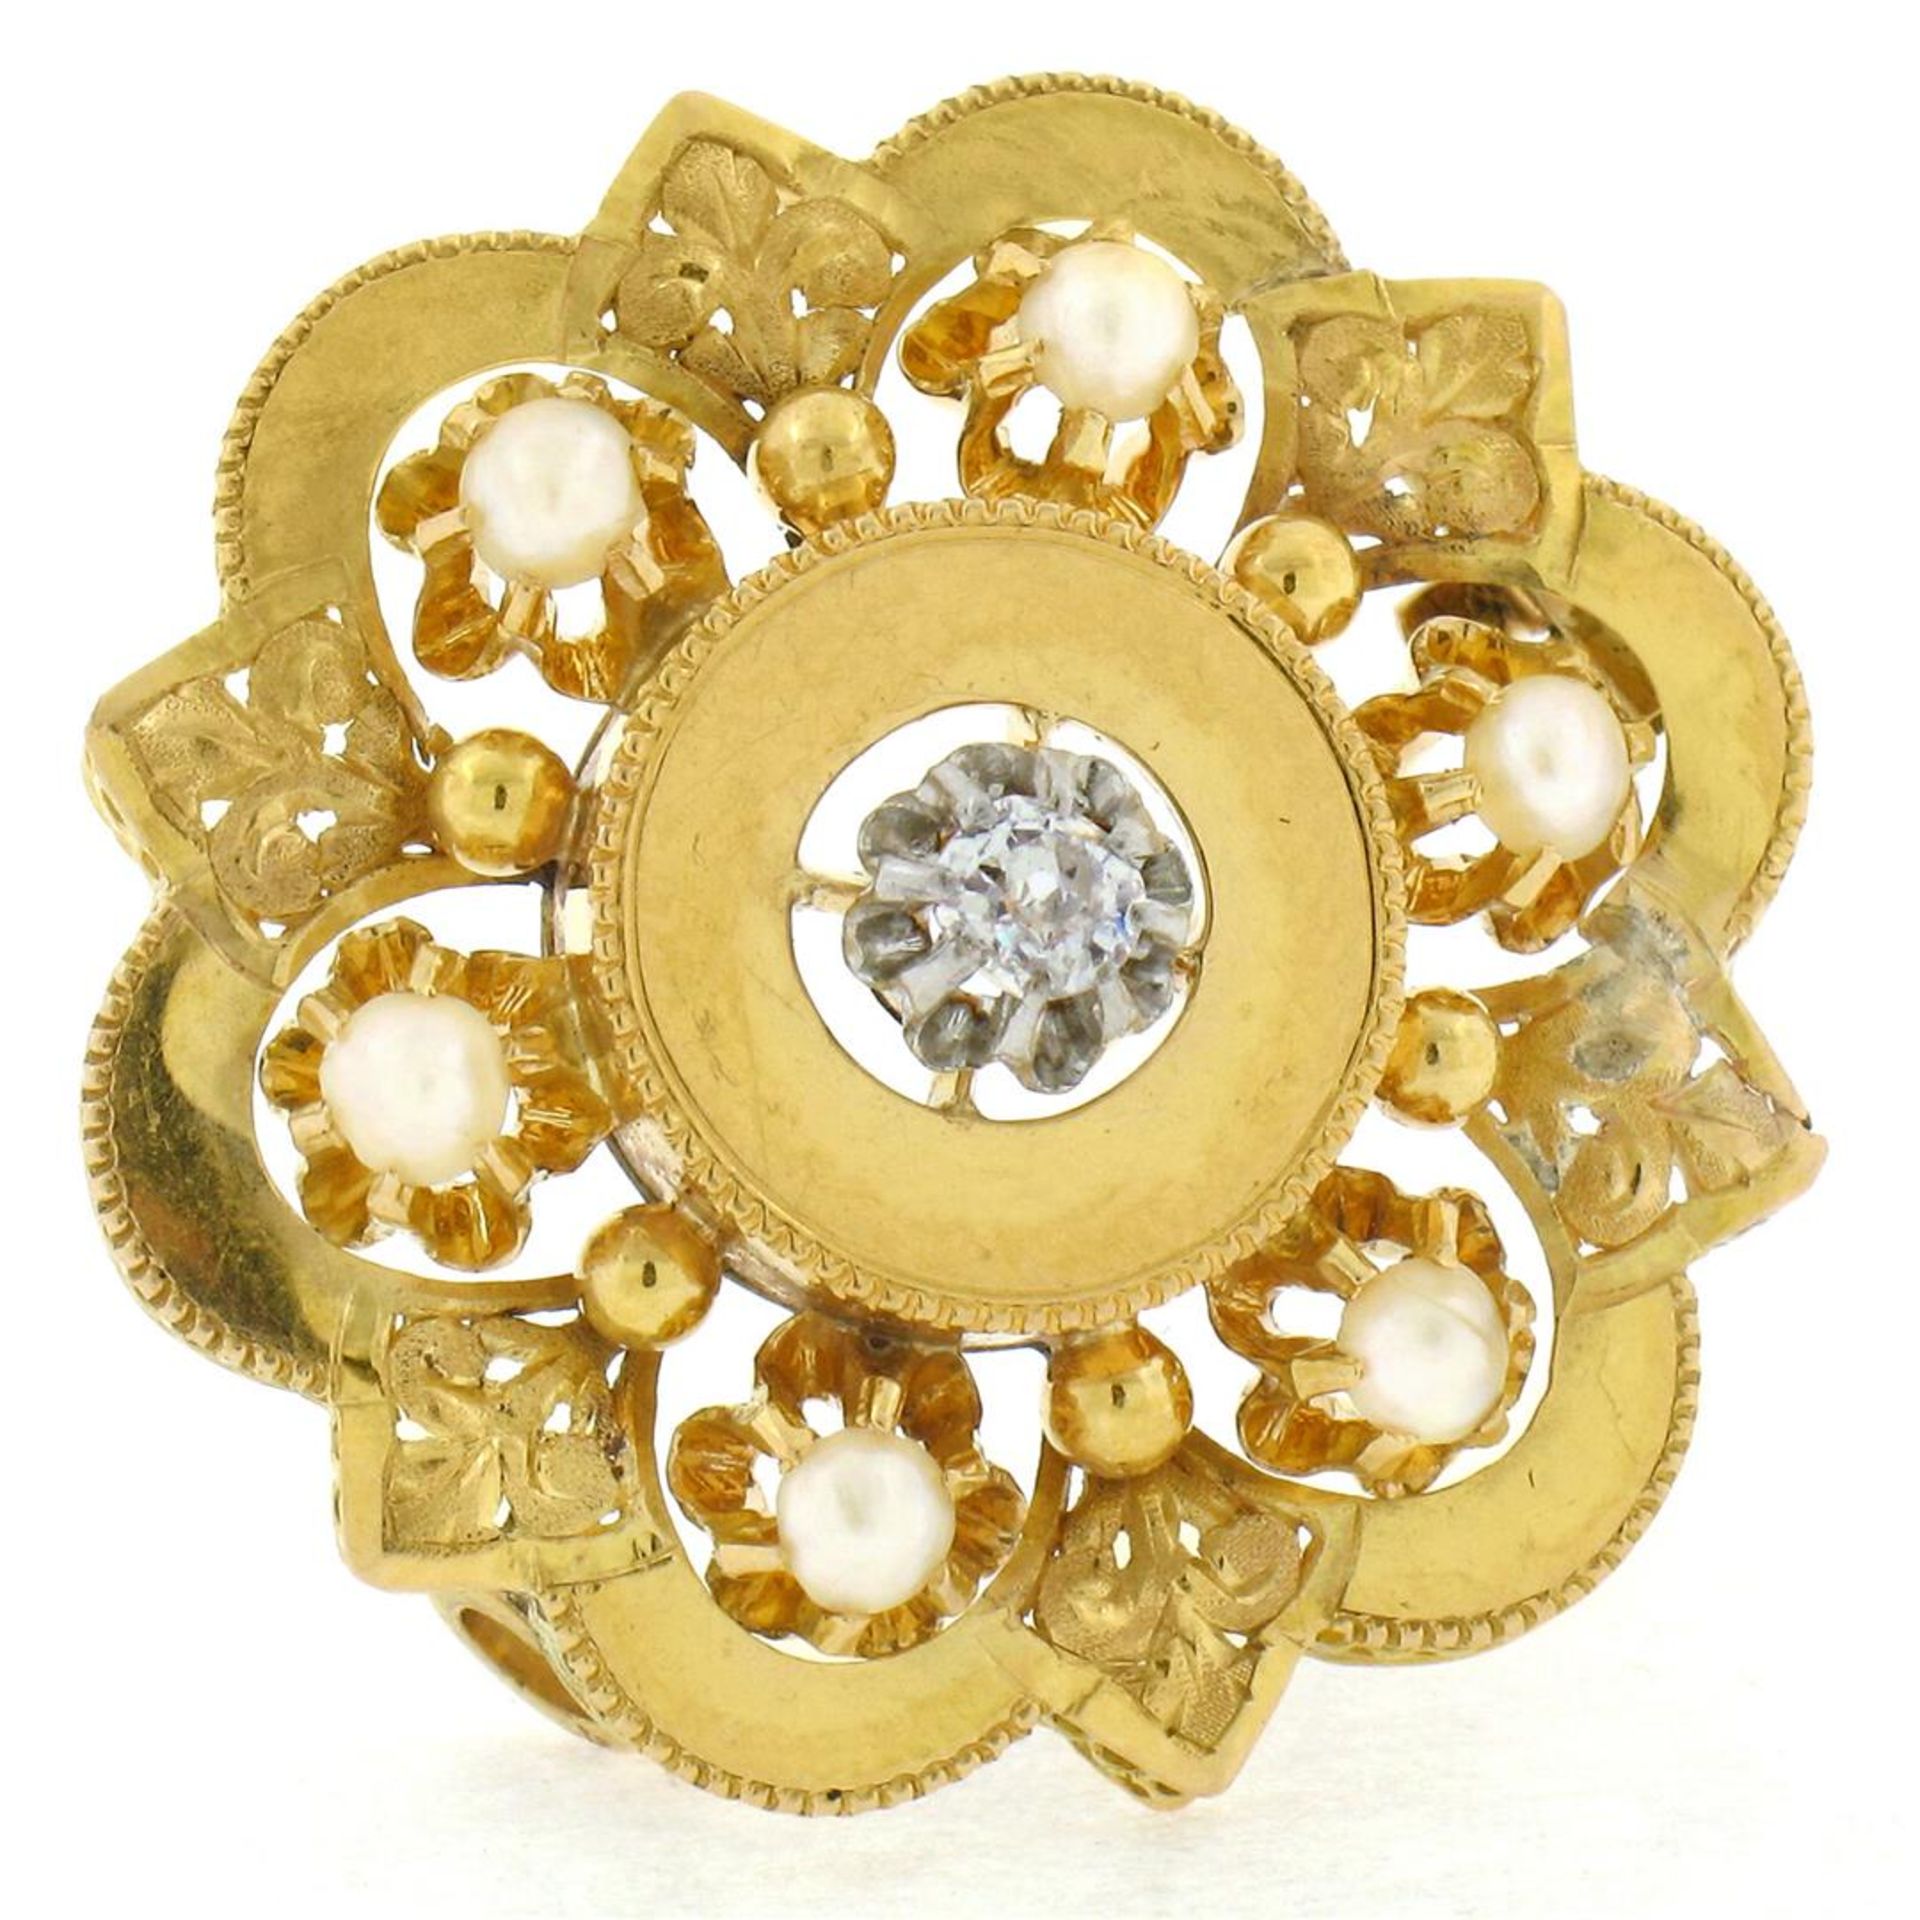 Antique Victorian 18K Yellow Gold Diamond Pearl Detailed Open Flower Brooch Pin - Image 3 of 7